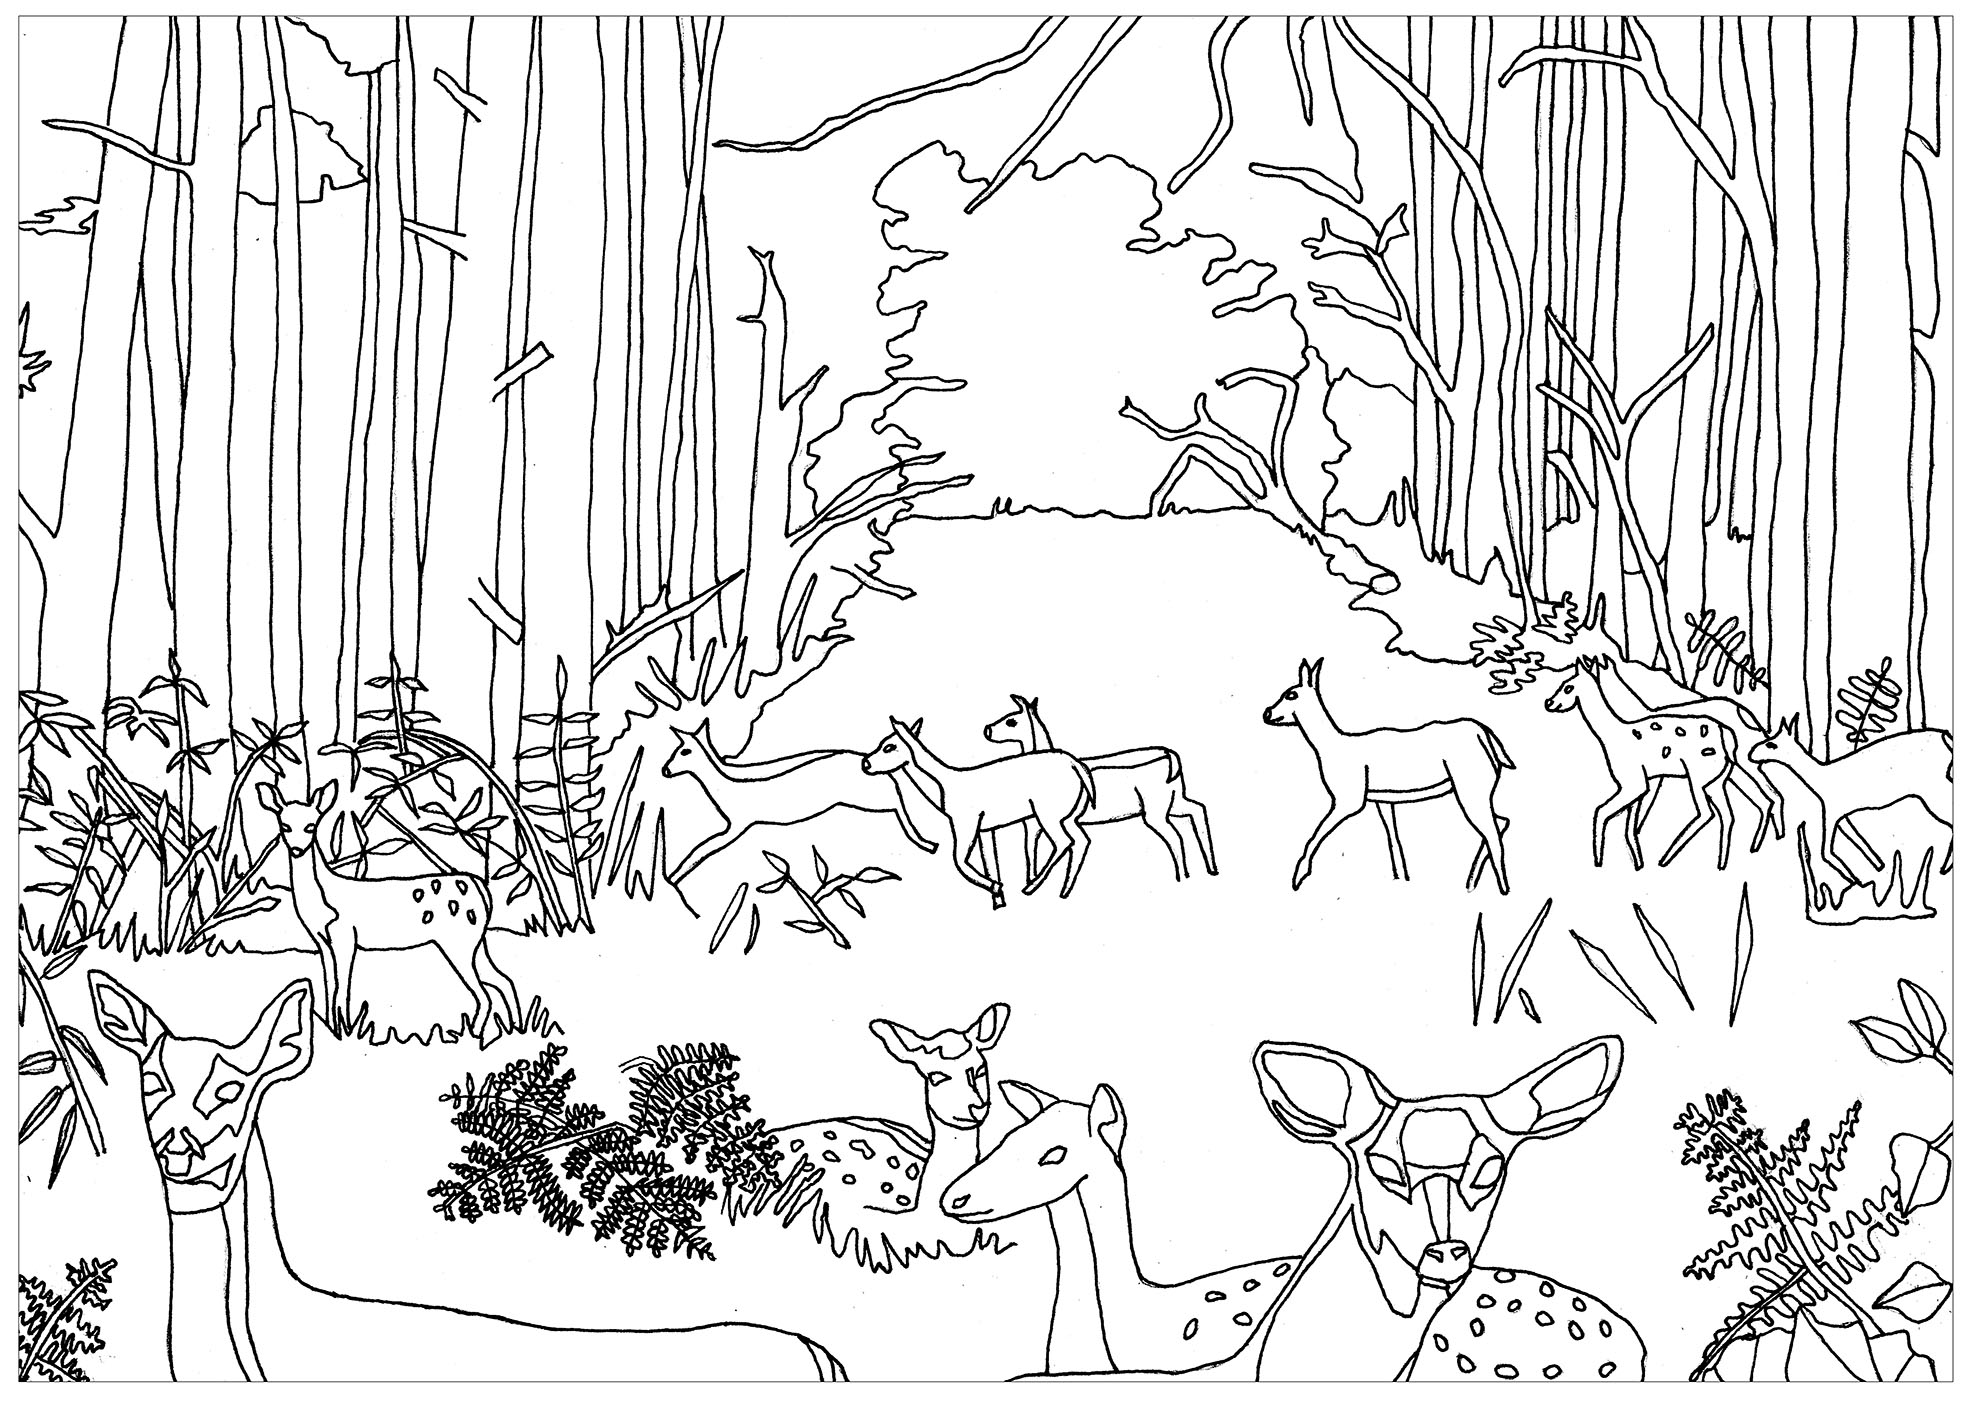 Does and Fawns in the forest